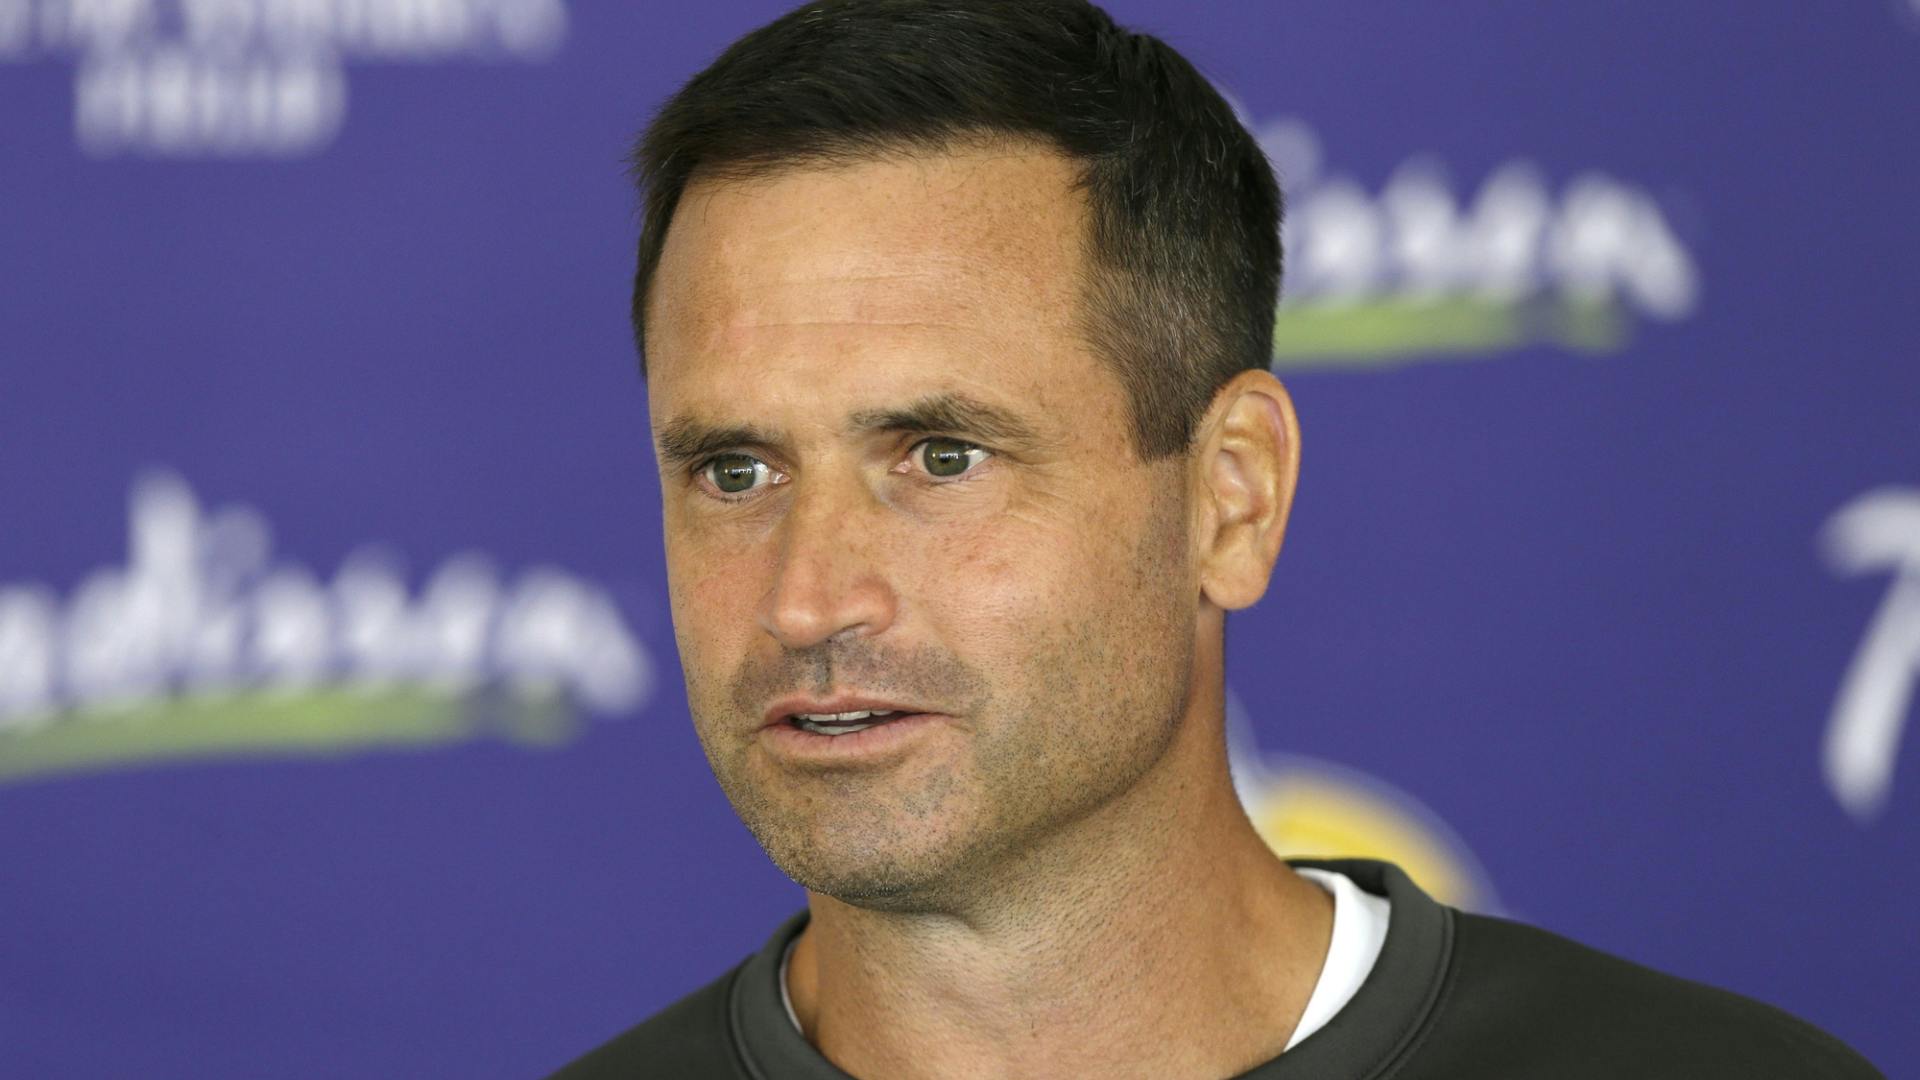 Full press conference: Vikings special teams coordinator Mike Preifer comments on former punter Chris Kluwe's accusations that Preifer made homophobic comments.